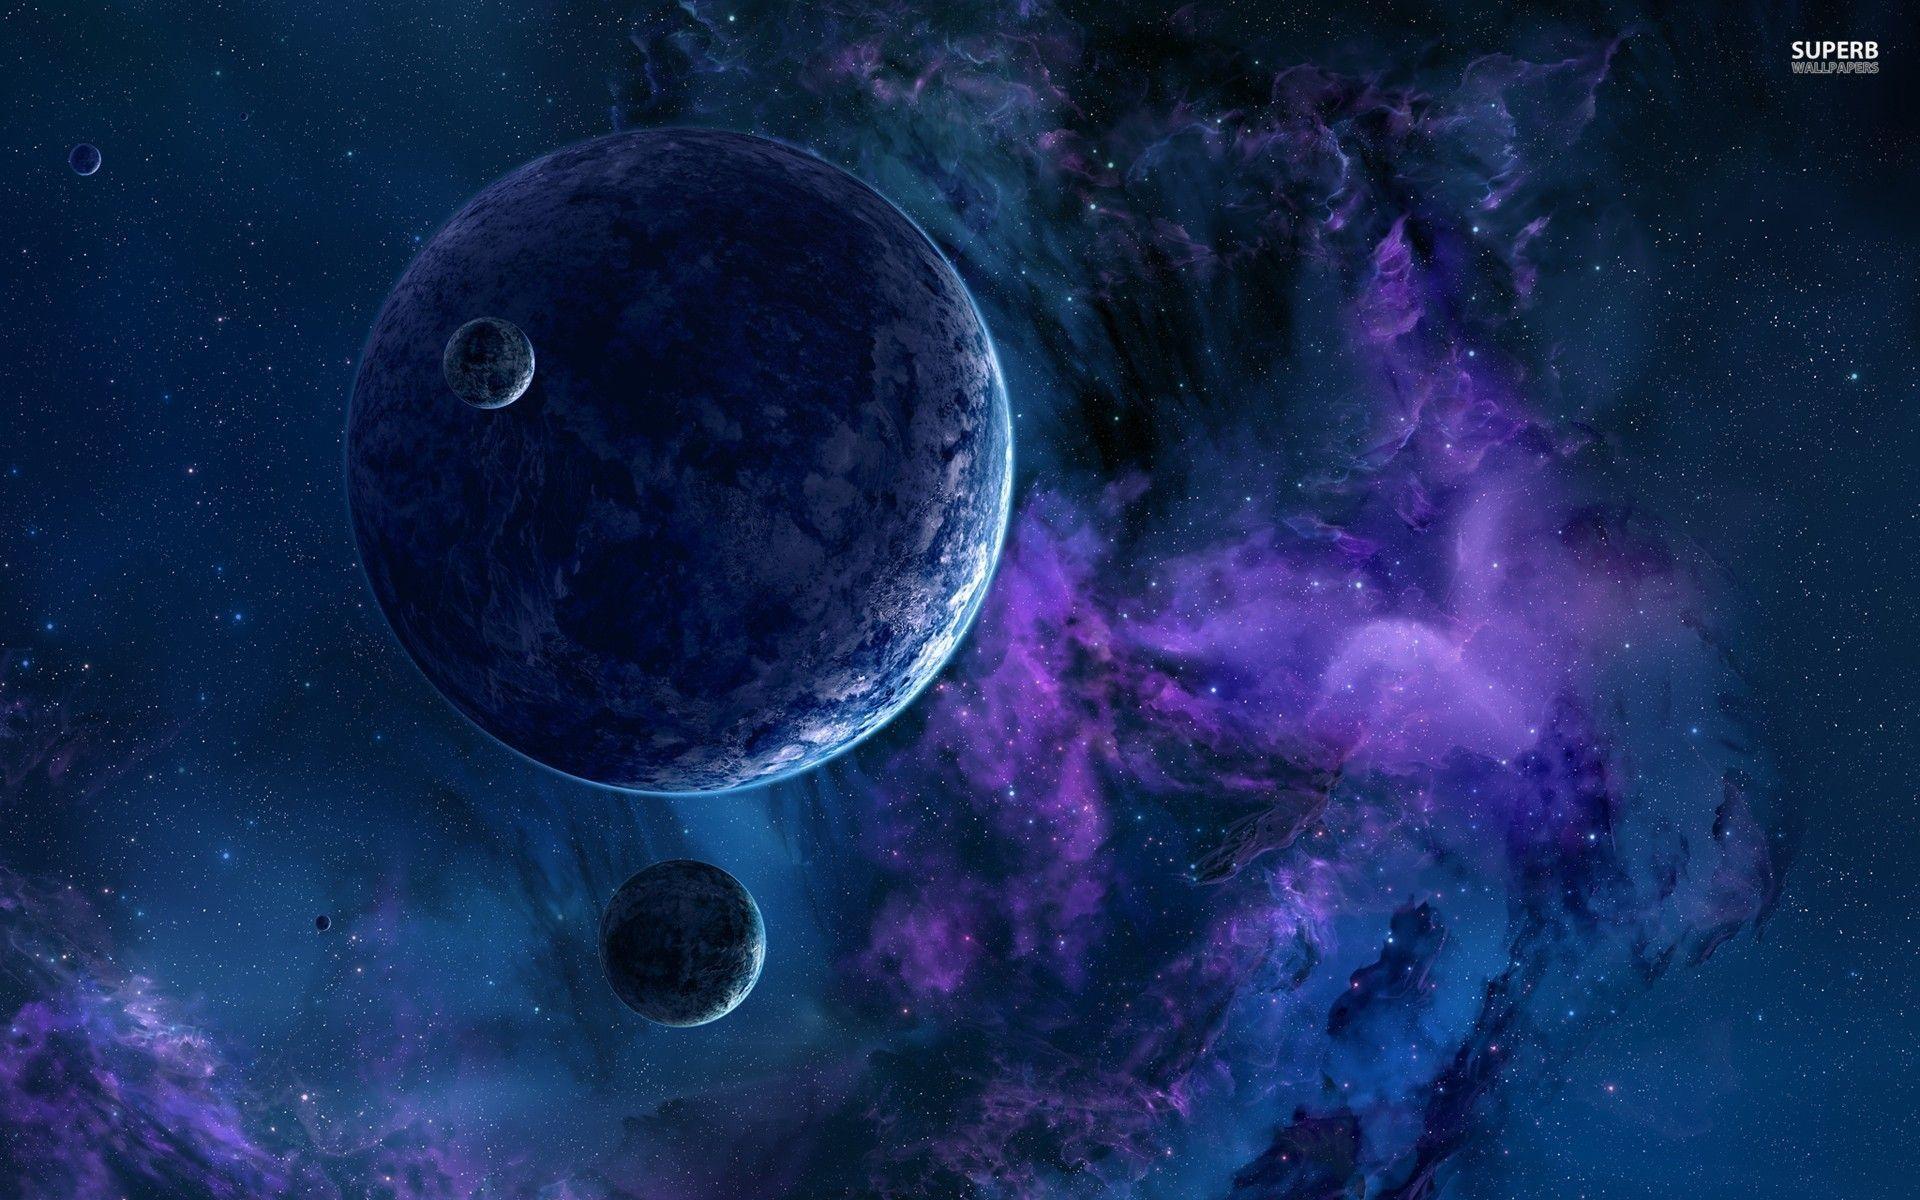 Space Iphone Wallpaper Purple Hd Wallpaper And Iphone 1152 851 Purple Space Wallpapers 36 Wallpapers Space Art Galaxy Background Space Iphone Wallpaper